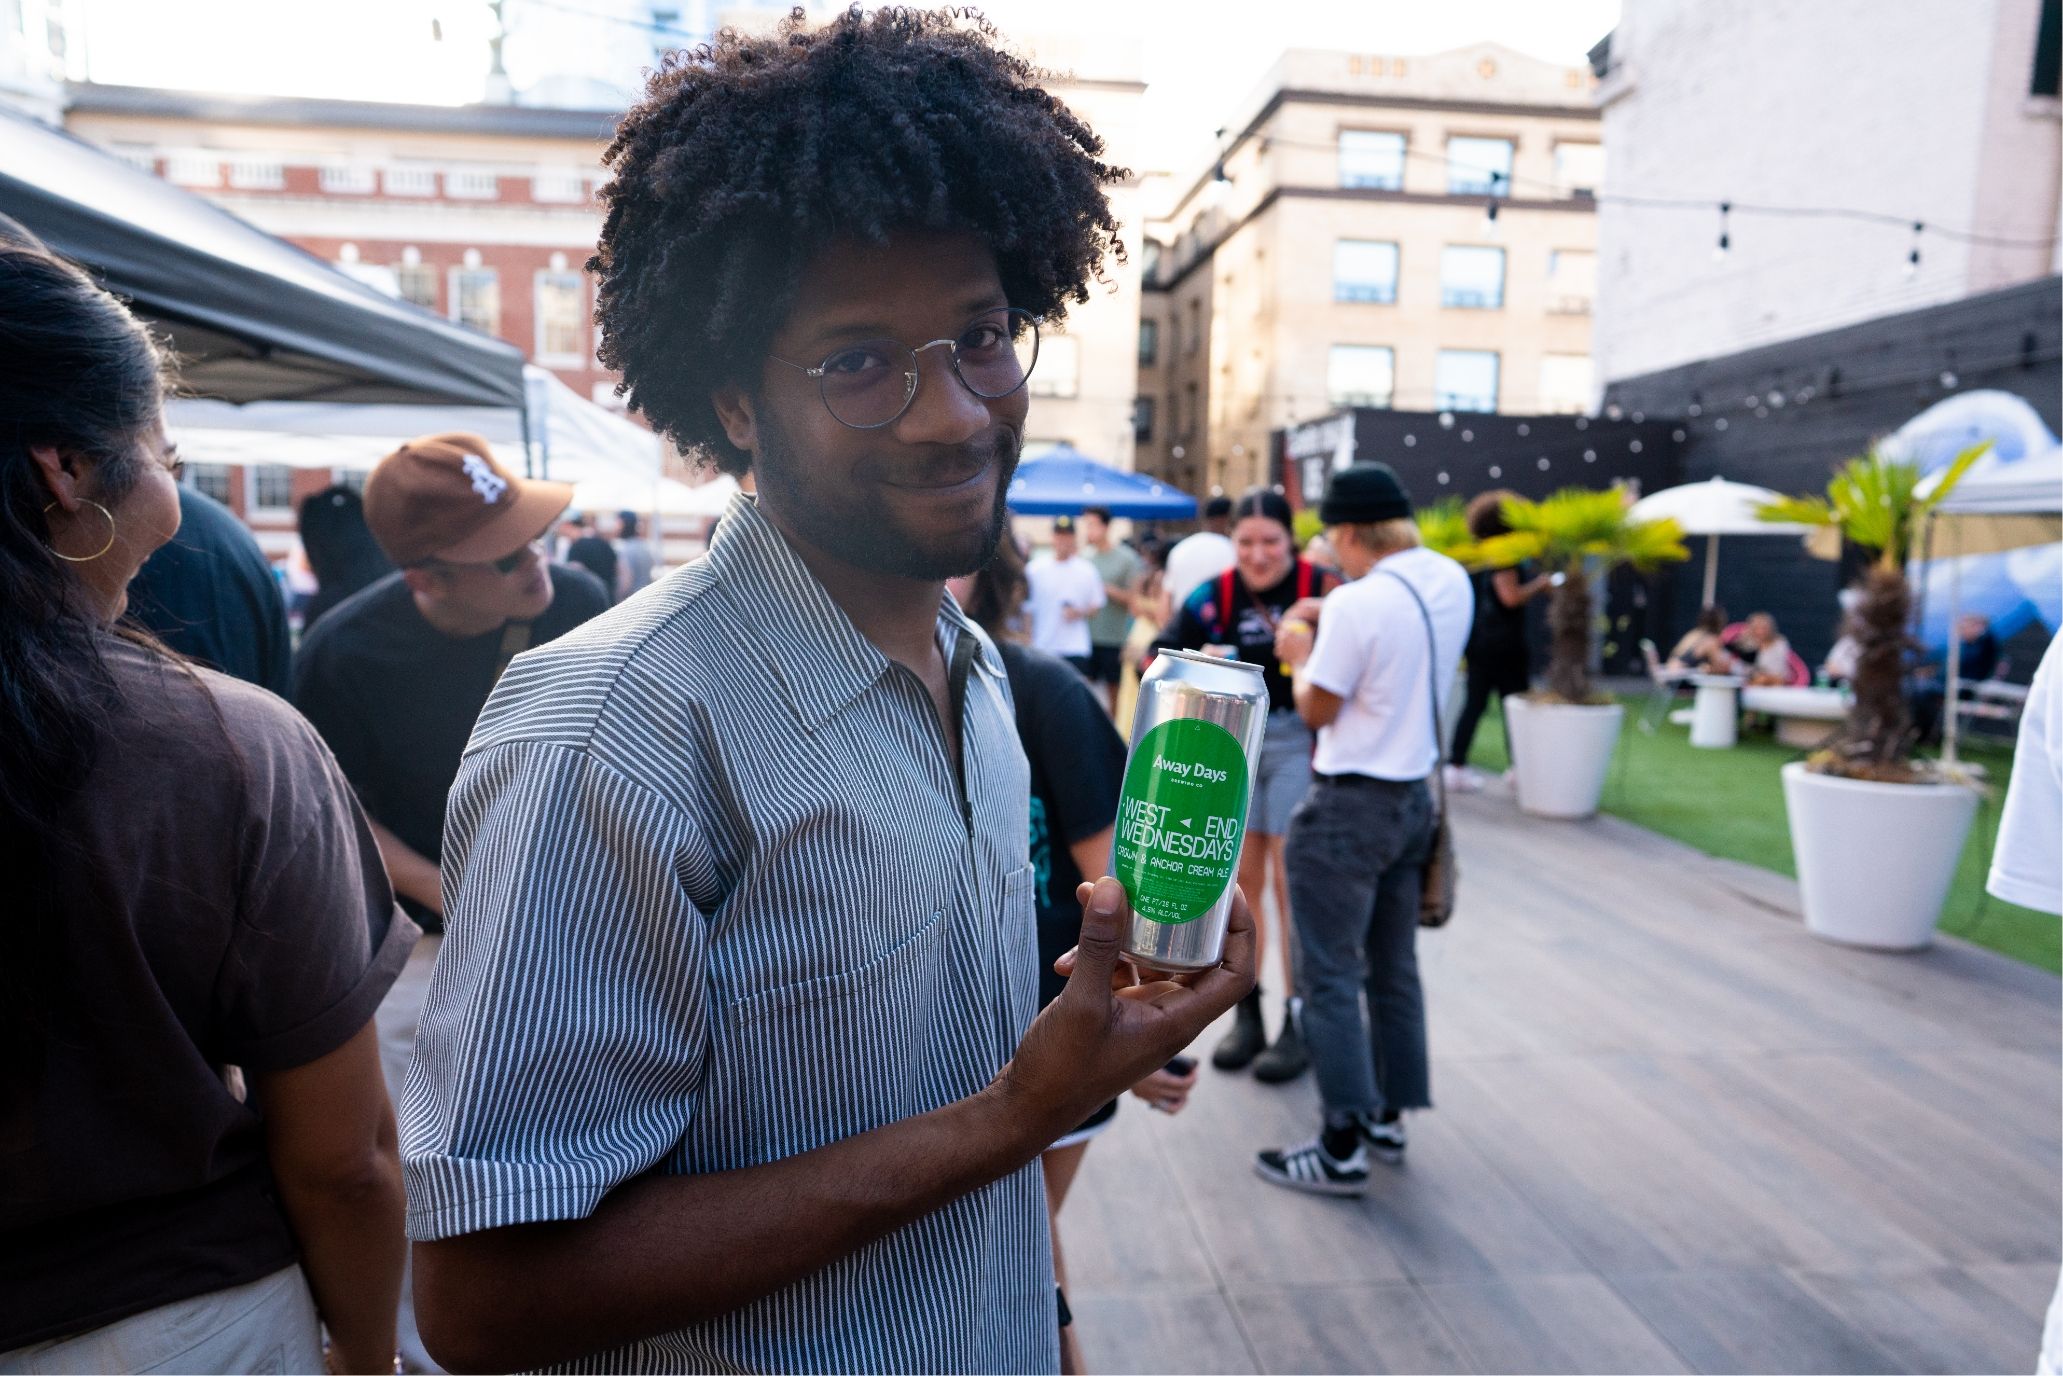 A man with afro hair holding a can of beer with West End Wednesday label.